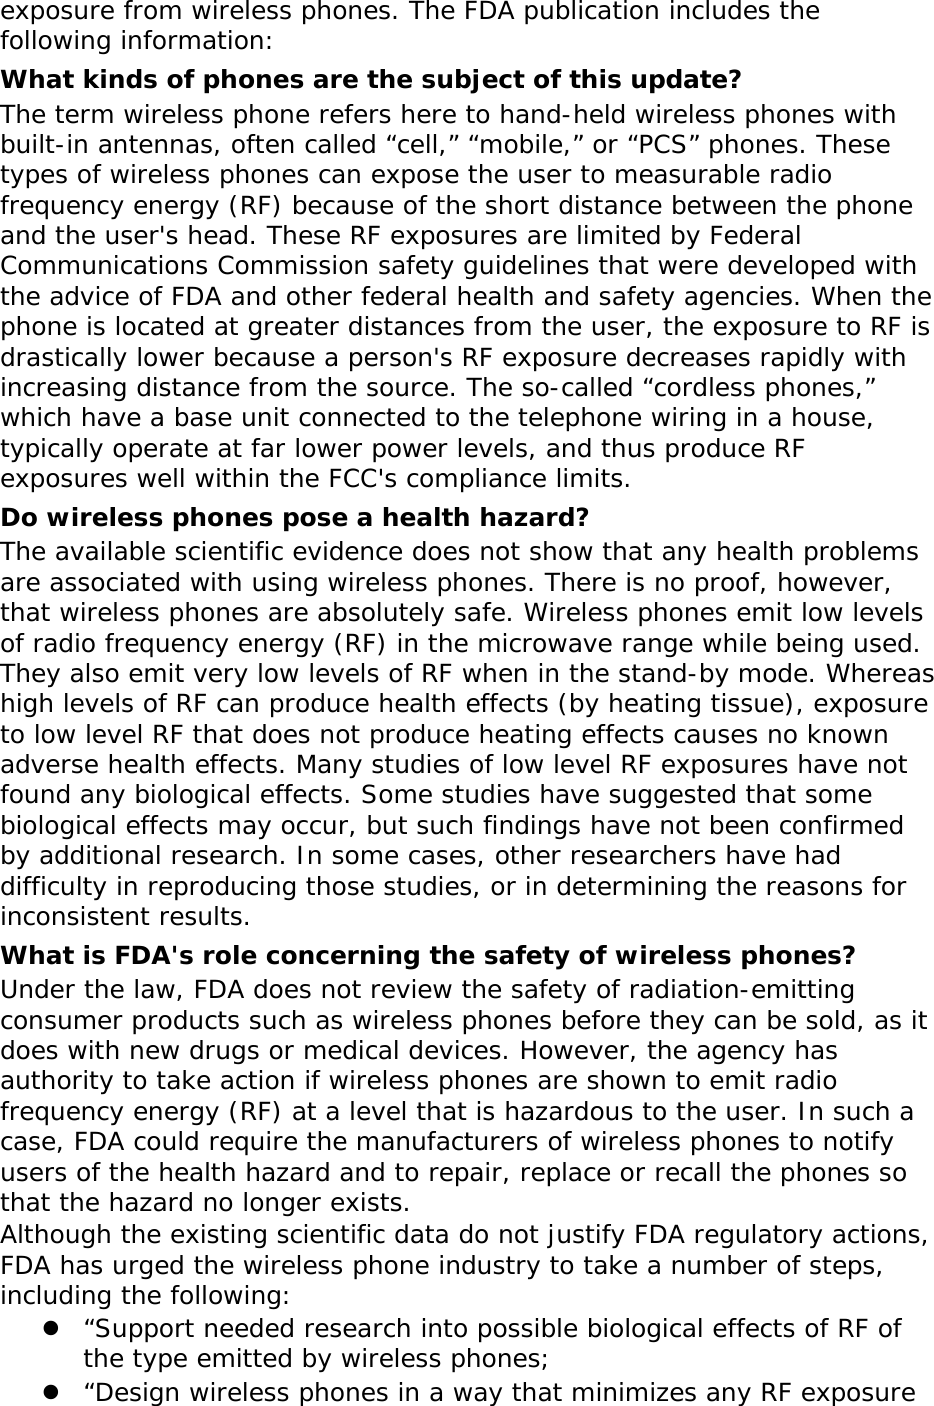 exposure from wireless phones. The FDA publication includes the following information: What kinds of phones are the subject of this update? The term wireless phone refers here to hand-held wireless phones with built-in antennas, often called “cell,” “mobile,” or “PCS” phones. These types of wireless phones can expose the user to measurable radio frequency energy (RF) because of the short distance between the phone and the user&apos;s head. These RF exposures are limited by Federal Communications Commission safety guidelines that were developed with the advice of FDA and other federal health and safety agencies. When the phone is located at greater distances from the user, the exposure to RF is drastically lower because a person&apos;s RF exposure decreases rapidly with increasing distance from the source. The so-called “cordless phones,” which have a base unit connected to the telephone wiring in a house, typically operate at far lower power levels, and thus produce RF exposures well within the FCC&apos;s compliance limits. Do wireless phones pose a health hazard? The available scientific evidence does not show that any health problems are associated with using wireless phones. There is no proof, however, that wireless phones are absolutely safe. Wireless phones emit low levels of radio frequency energy (RF) in the microwave range while being used. They also emit very low levels of RF when in the stand-by mode. Whereas high levels of RF can produce health effects (by heating tissue), exposure to low level RF that does not produce heating effects causes no known adverse health effects. Many studies of low level RF exposures have not found any biological effects. Some studies have suggested that some biological effects may occur, but such findings have not been confirmed by additional research. In some cases, other researchers have had difficulty in reproducing those studies, or in determining the reasons for inconsistent results. What is FDA&apos;s role concerning the safety of wireless phones? Under the law, FDA does not review the safety of radiation-emitting consumer products such as wireless phones before they can be sold, as it does with new drugs or medical devices. However, the agency has authority to take action if wireless phones are shown to emit radio frequency energy (RF) at a level that is hazardous to the user. In such a case, FDA could require the manufacturers of wireless phones to notify users of the health hazard and to repair, replace or recall the phones so that the hazard no longer exists. Although the existing scientific data do not justify FDA regulatory actions, FDA has urged the wireless phone industry to take a number of steps, including the following:  “Support needed research into possible biological effects of RF of the type emitted by wireless phones;  “Design wireless phones in a way that minimizes any RF exposure 